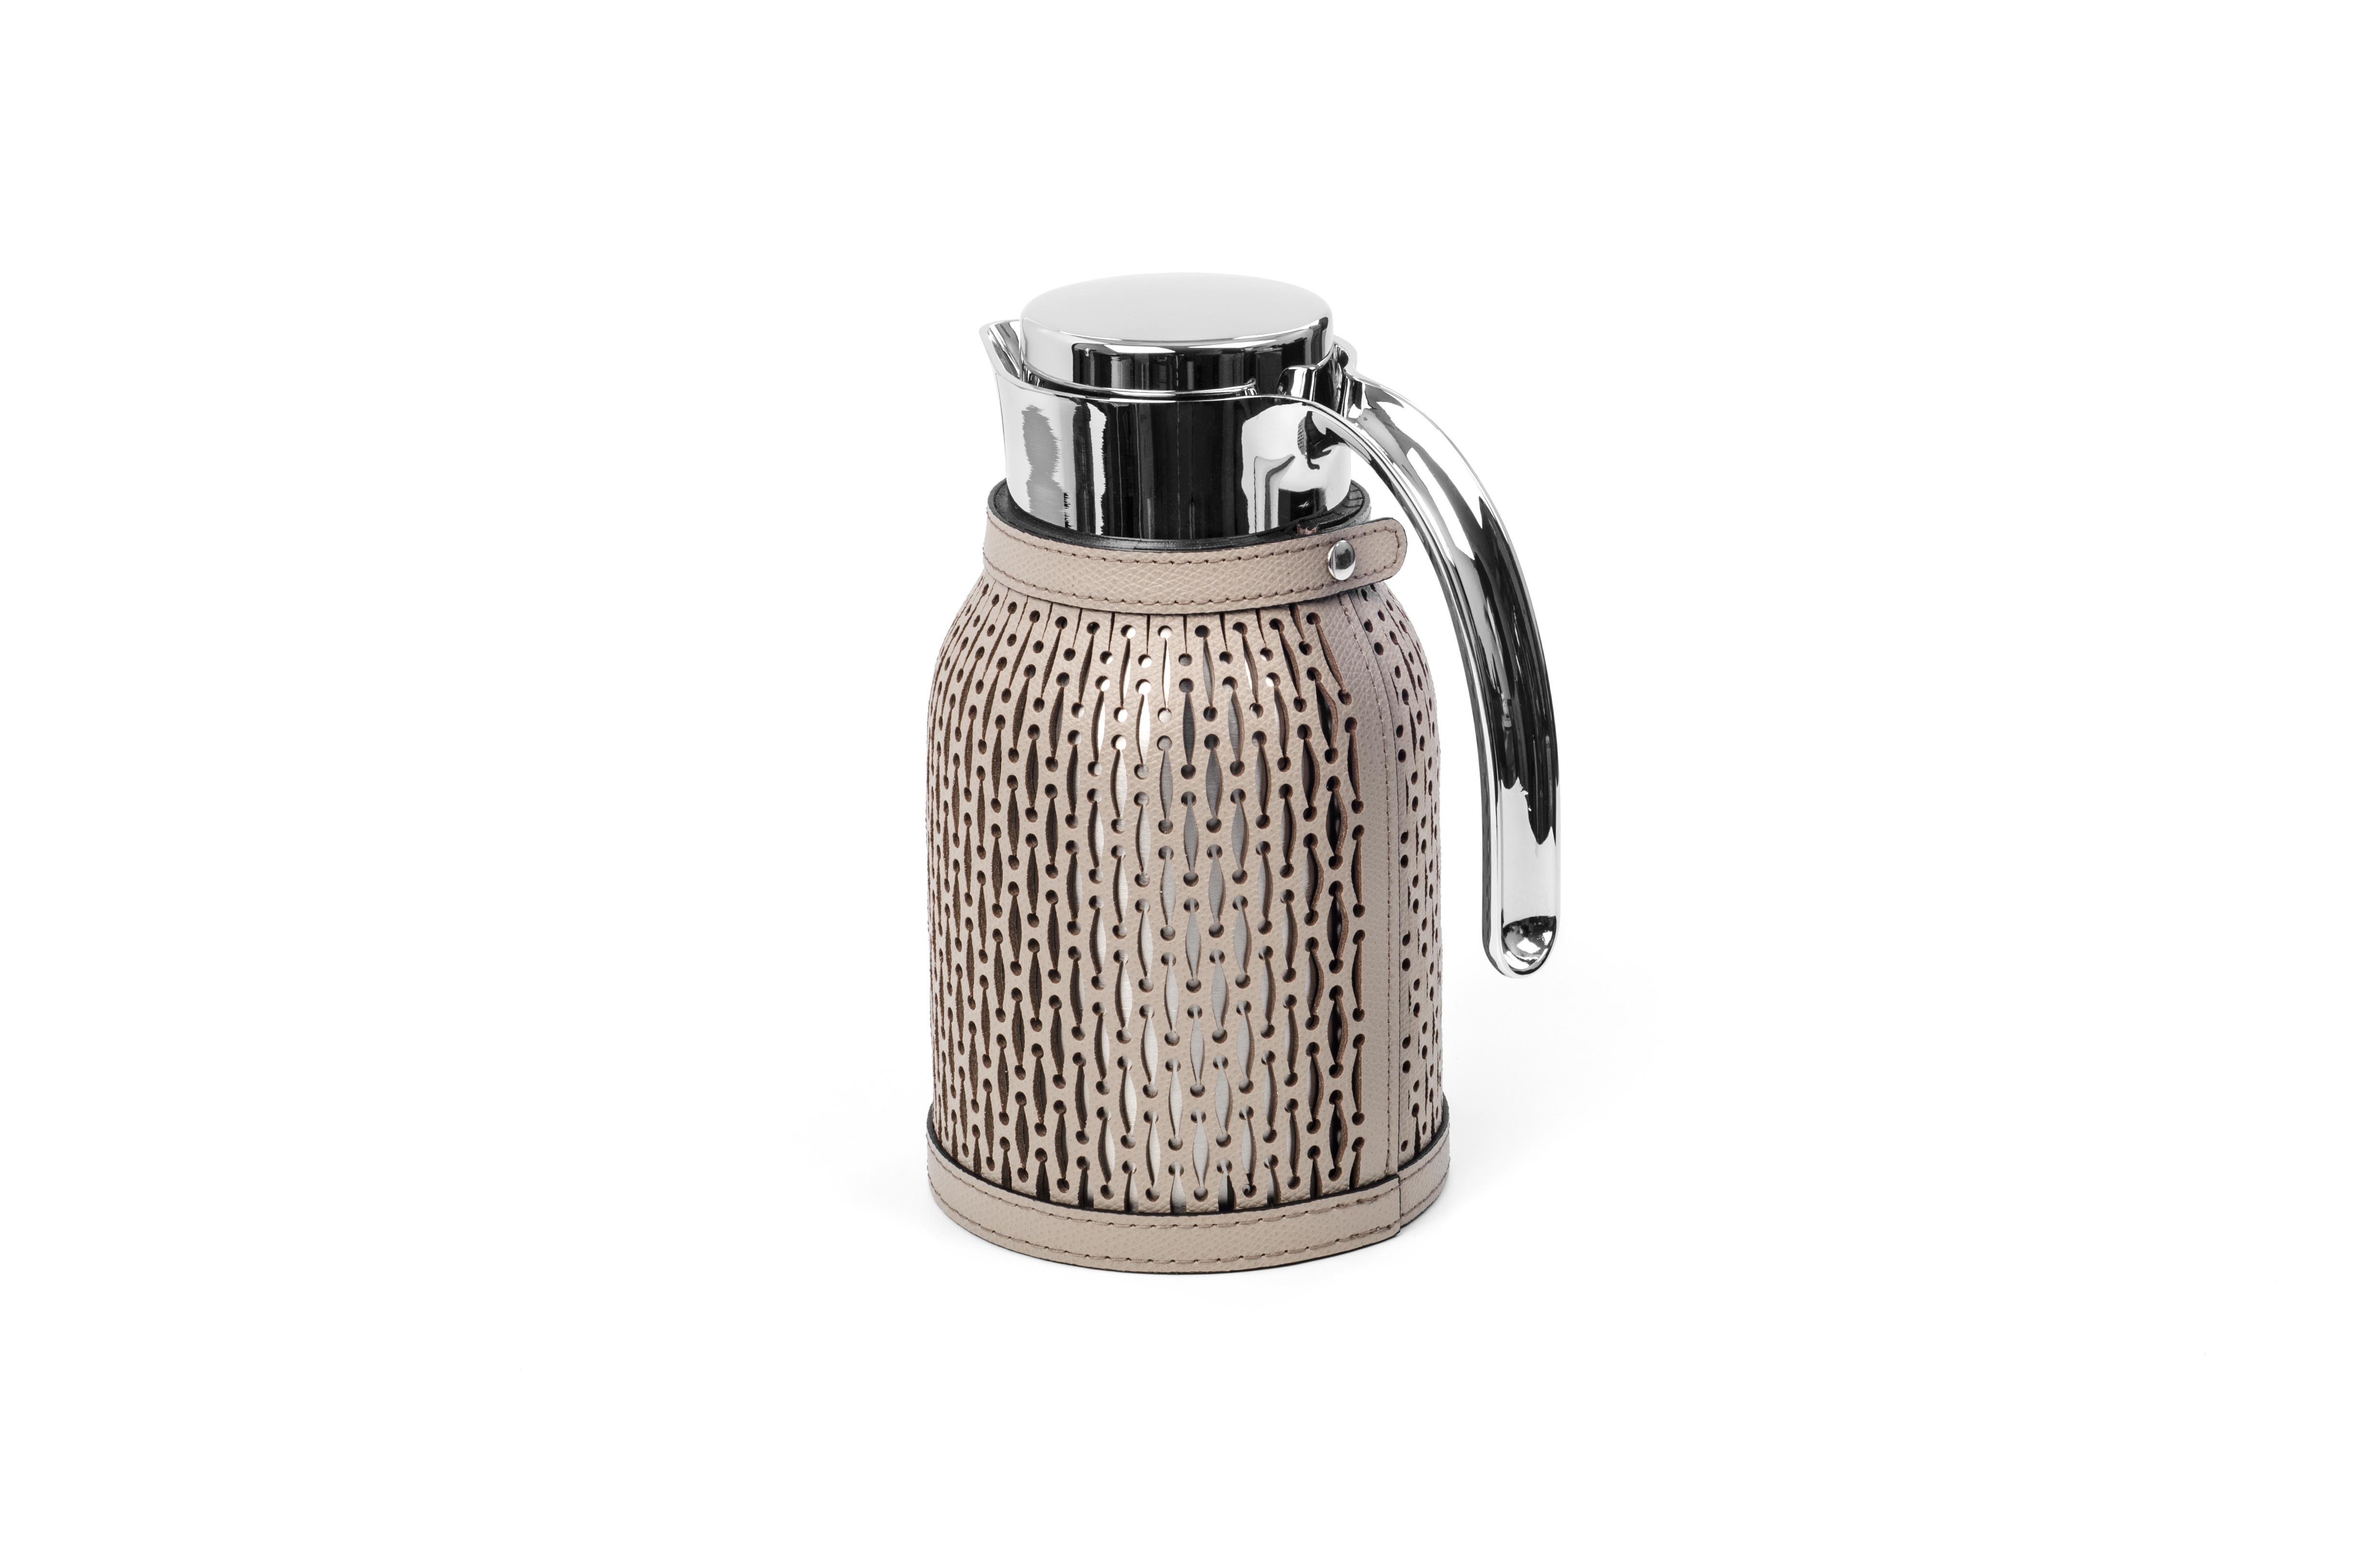 A new style with a brand new laser cut pattern that beautifully finishes the elegant leather cover.

Diana is the new Pinetti steel thermal carafe with a capacity 1L, featuring a practical button closure that allows an easy removal of the cover